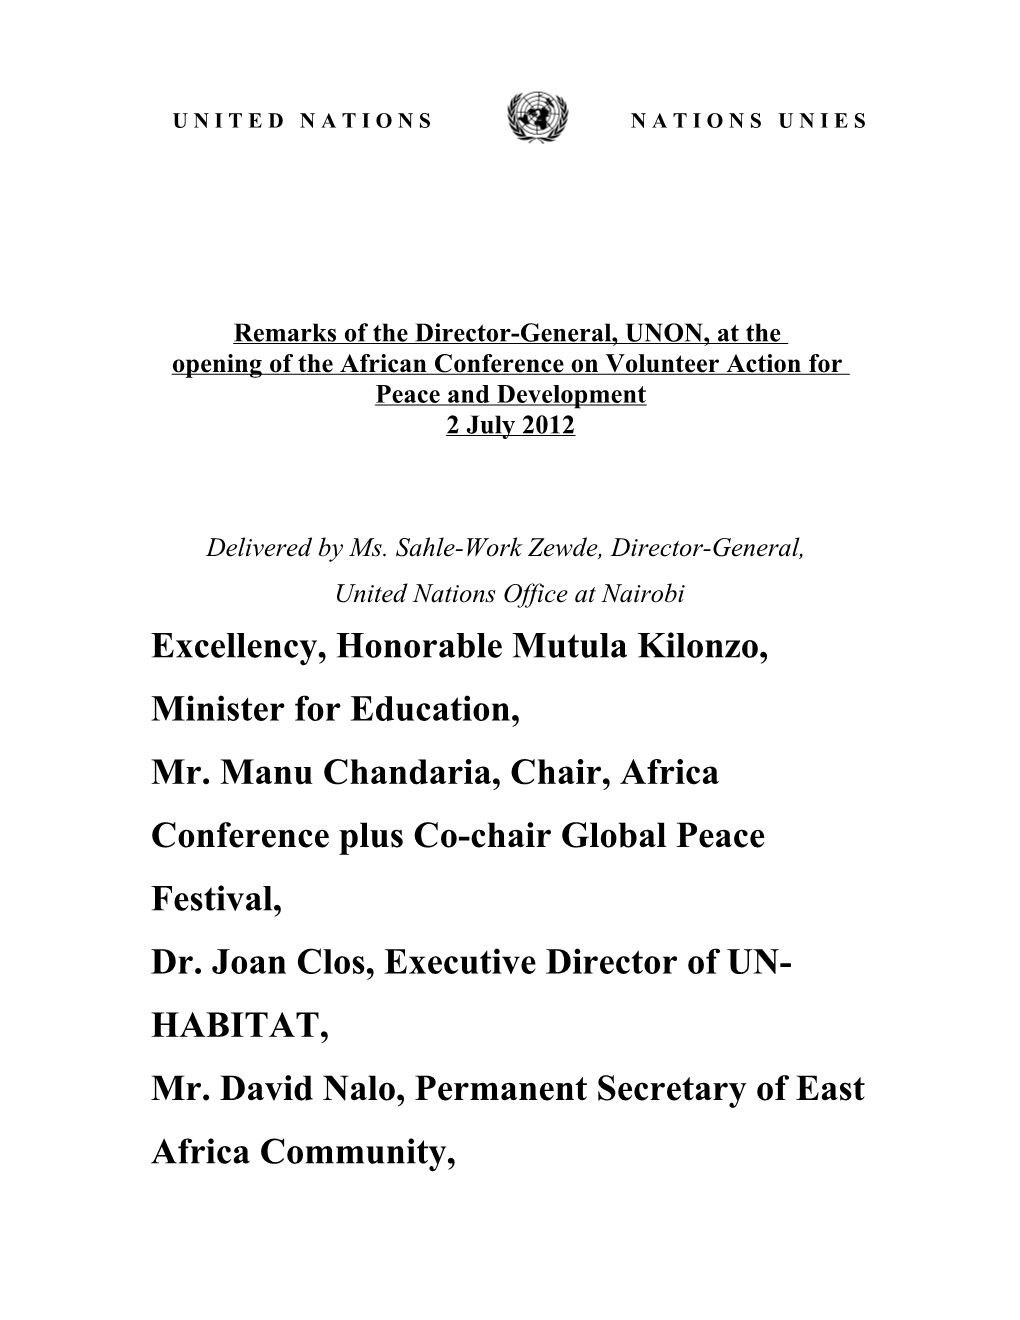 Remarks of the Director-General, UNON, at The